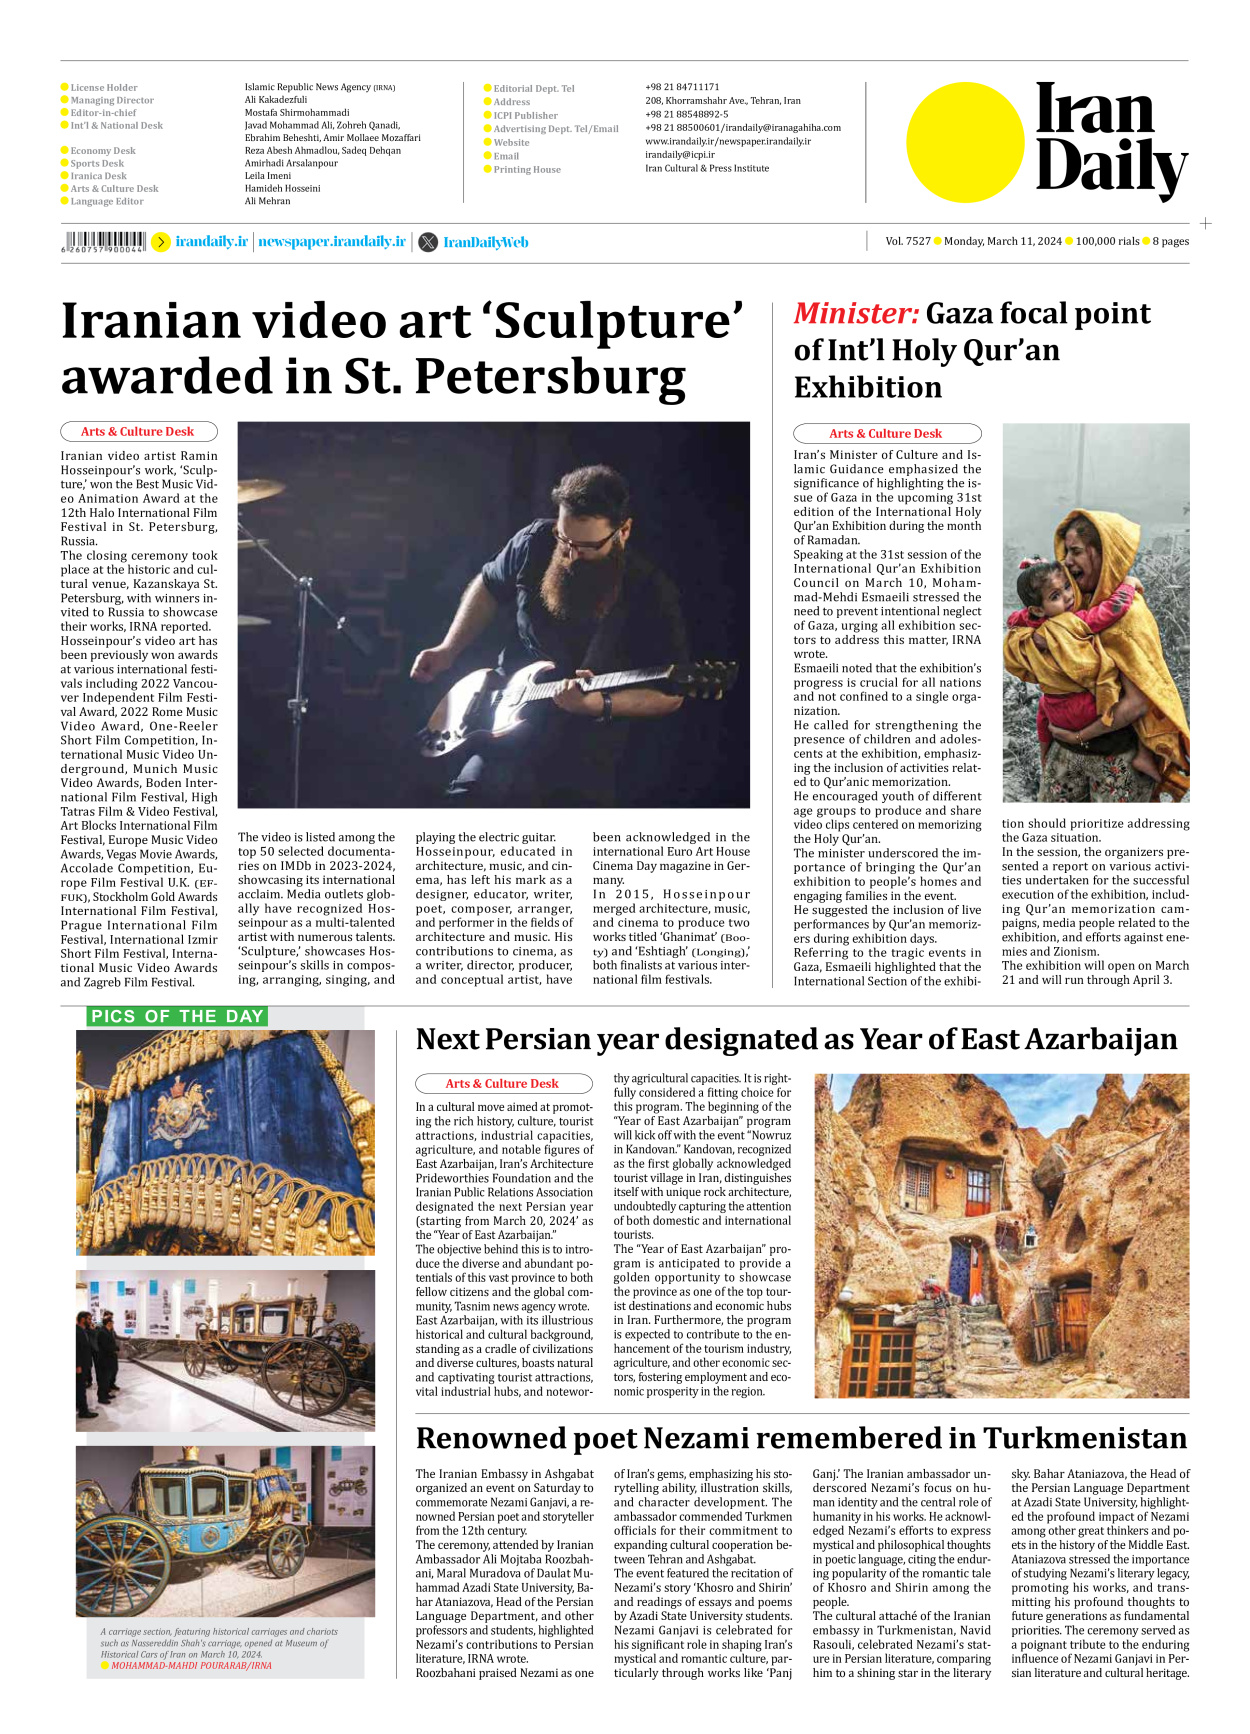 Iran Daily - Number Seven Thousand Five Hundred and Twenty Seven - 11 March 2024 - Page 8